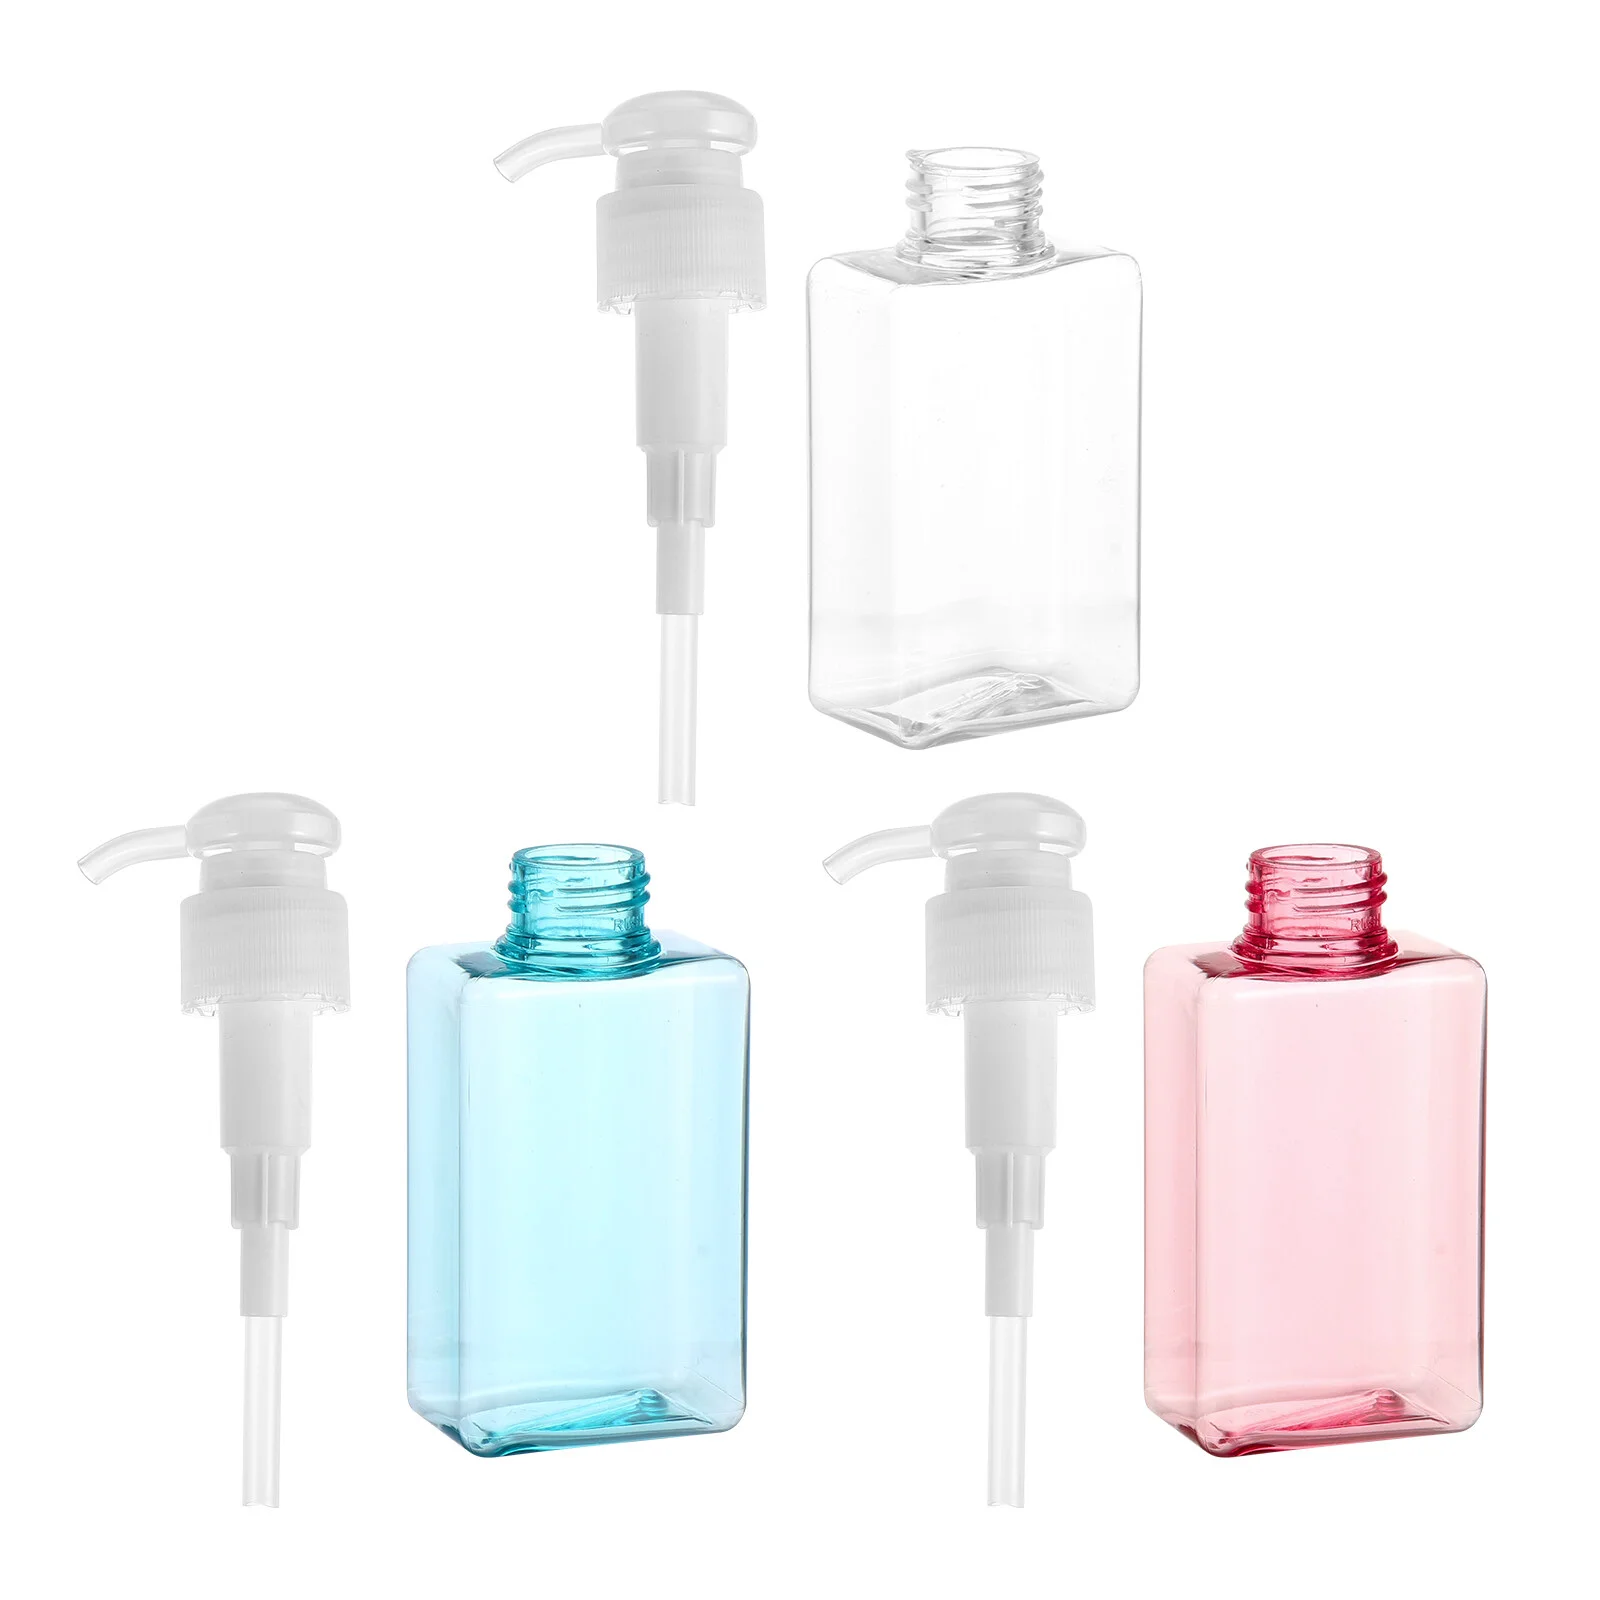 

3 Pcs Lotion Container Bottled Subpacking Portable Dispenser Refillable Empty 11x5cm Water Sprayer Plastic Travel